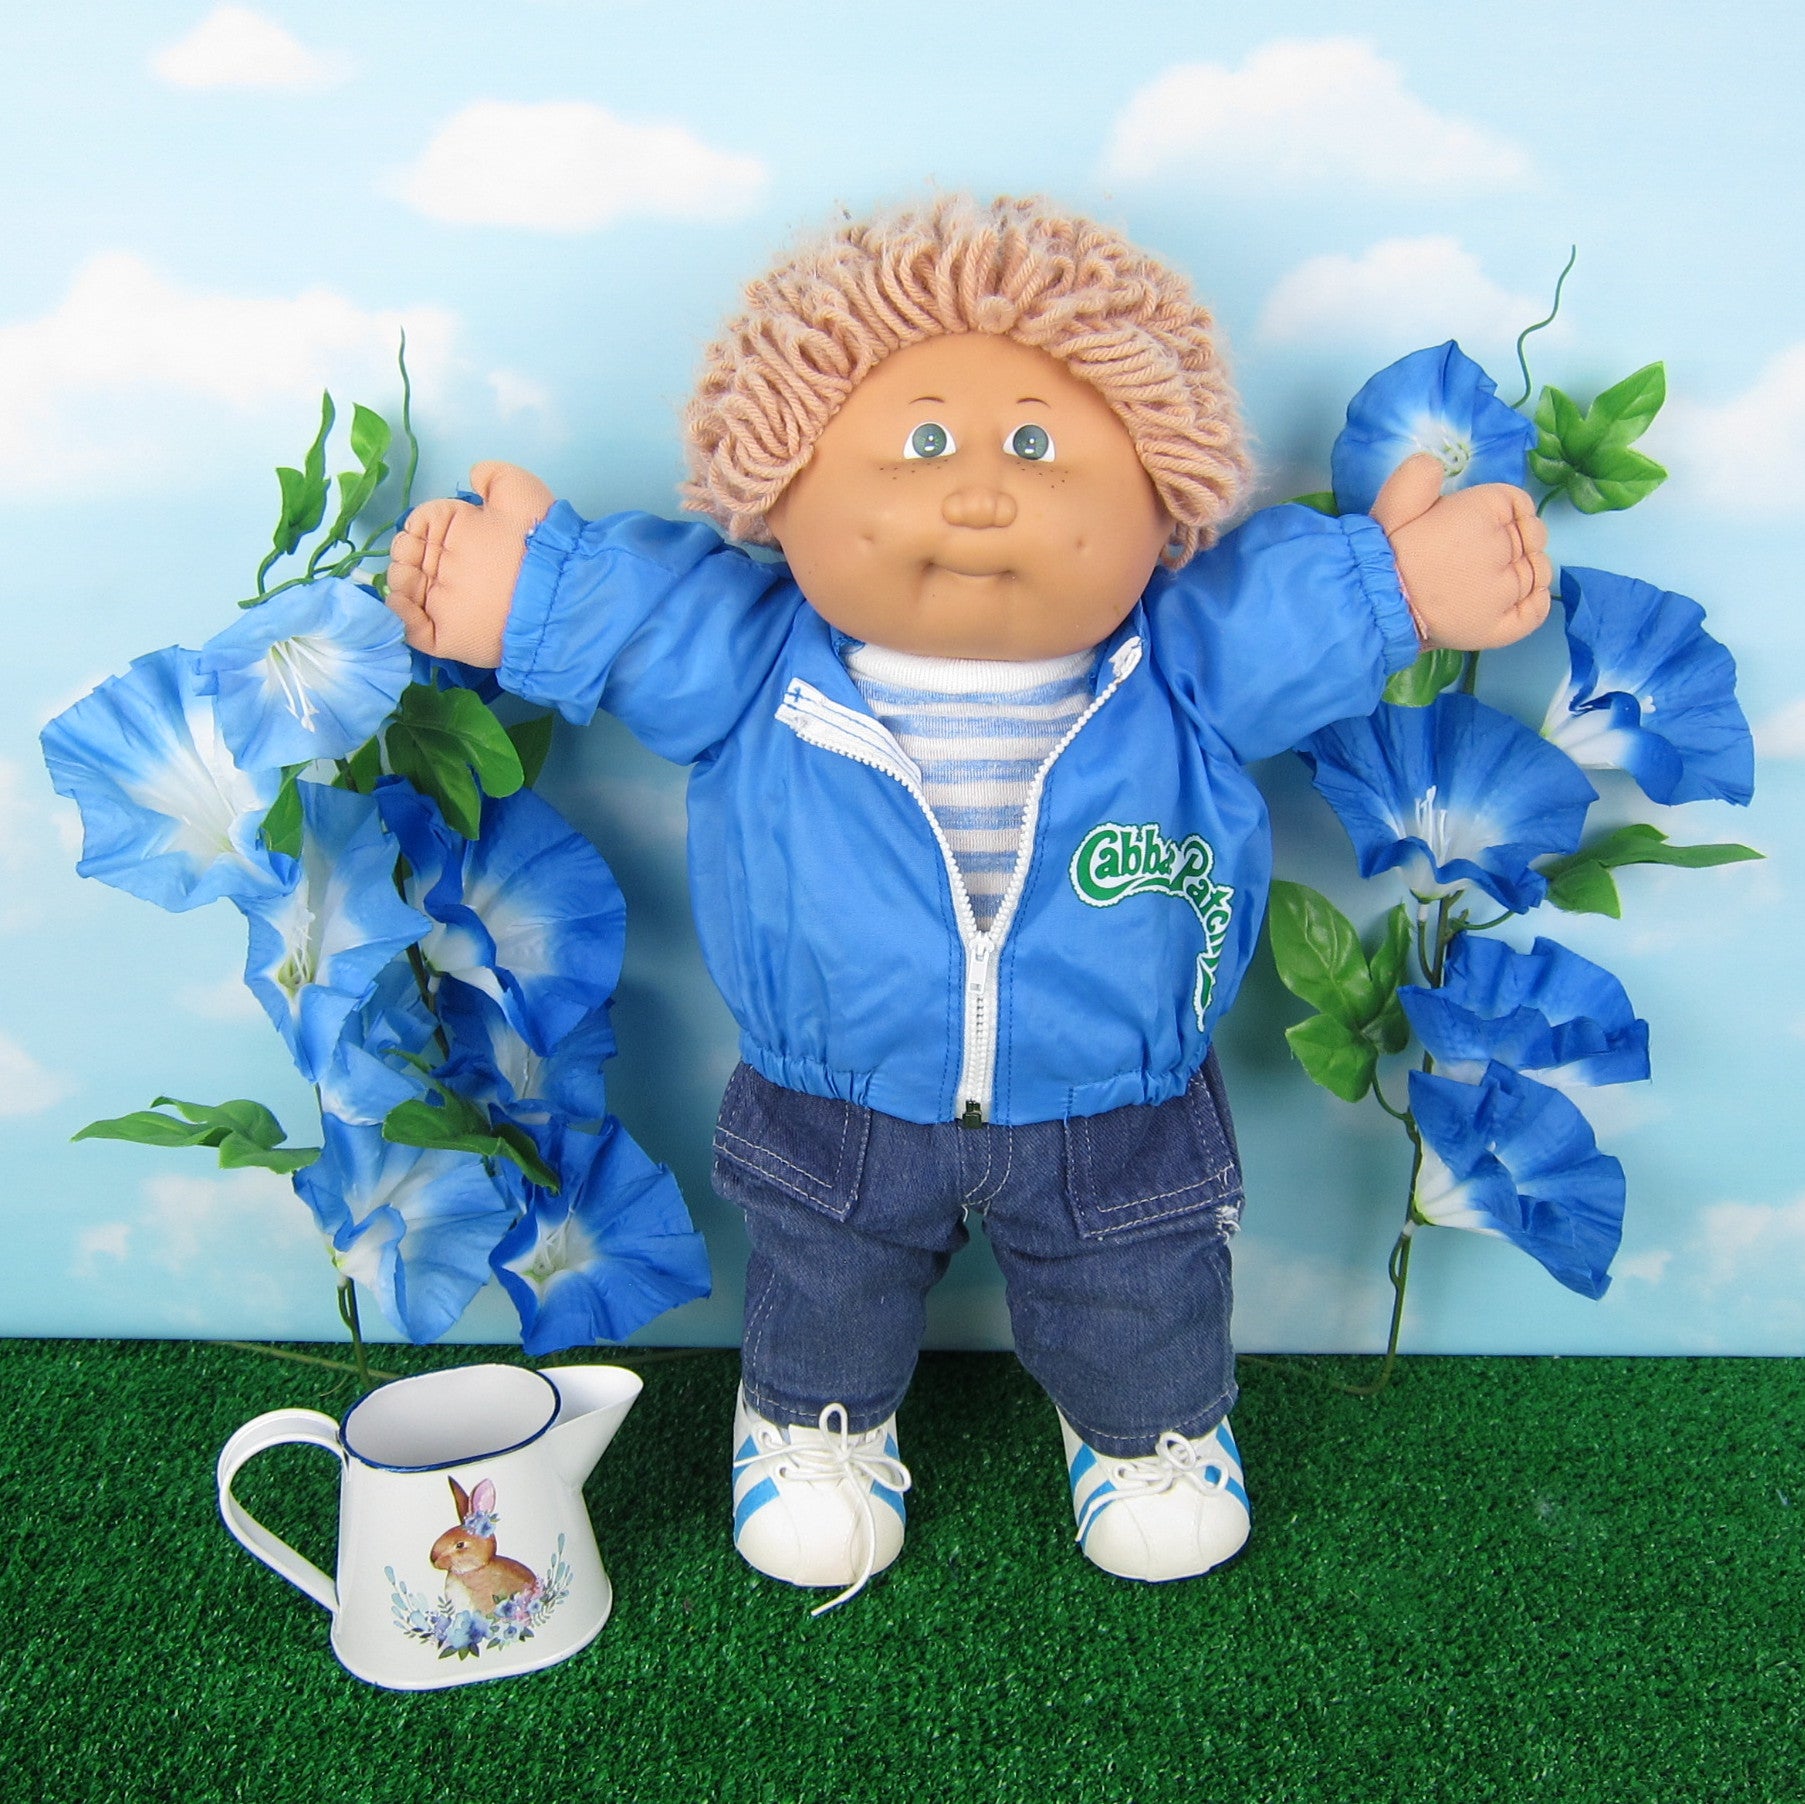 Cabbage Patch Kids boy doll with light brown hair, green eyes, freckles and dimples